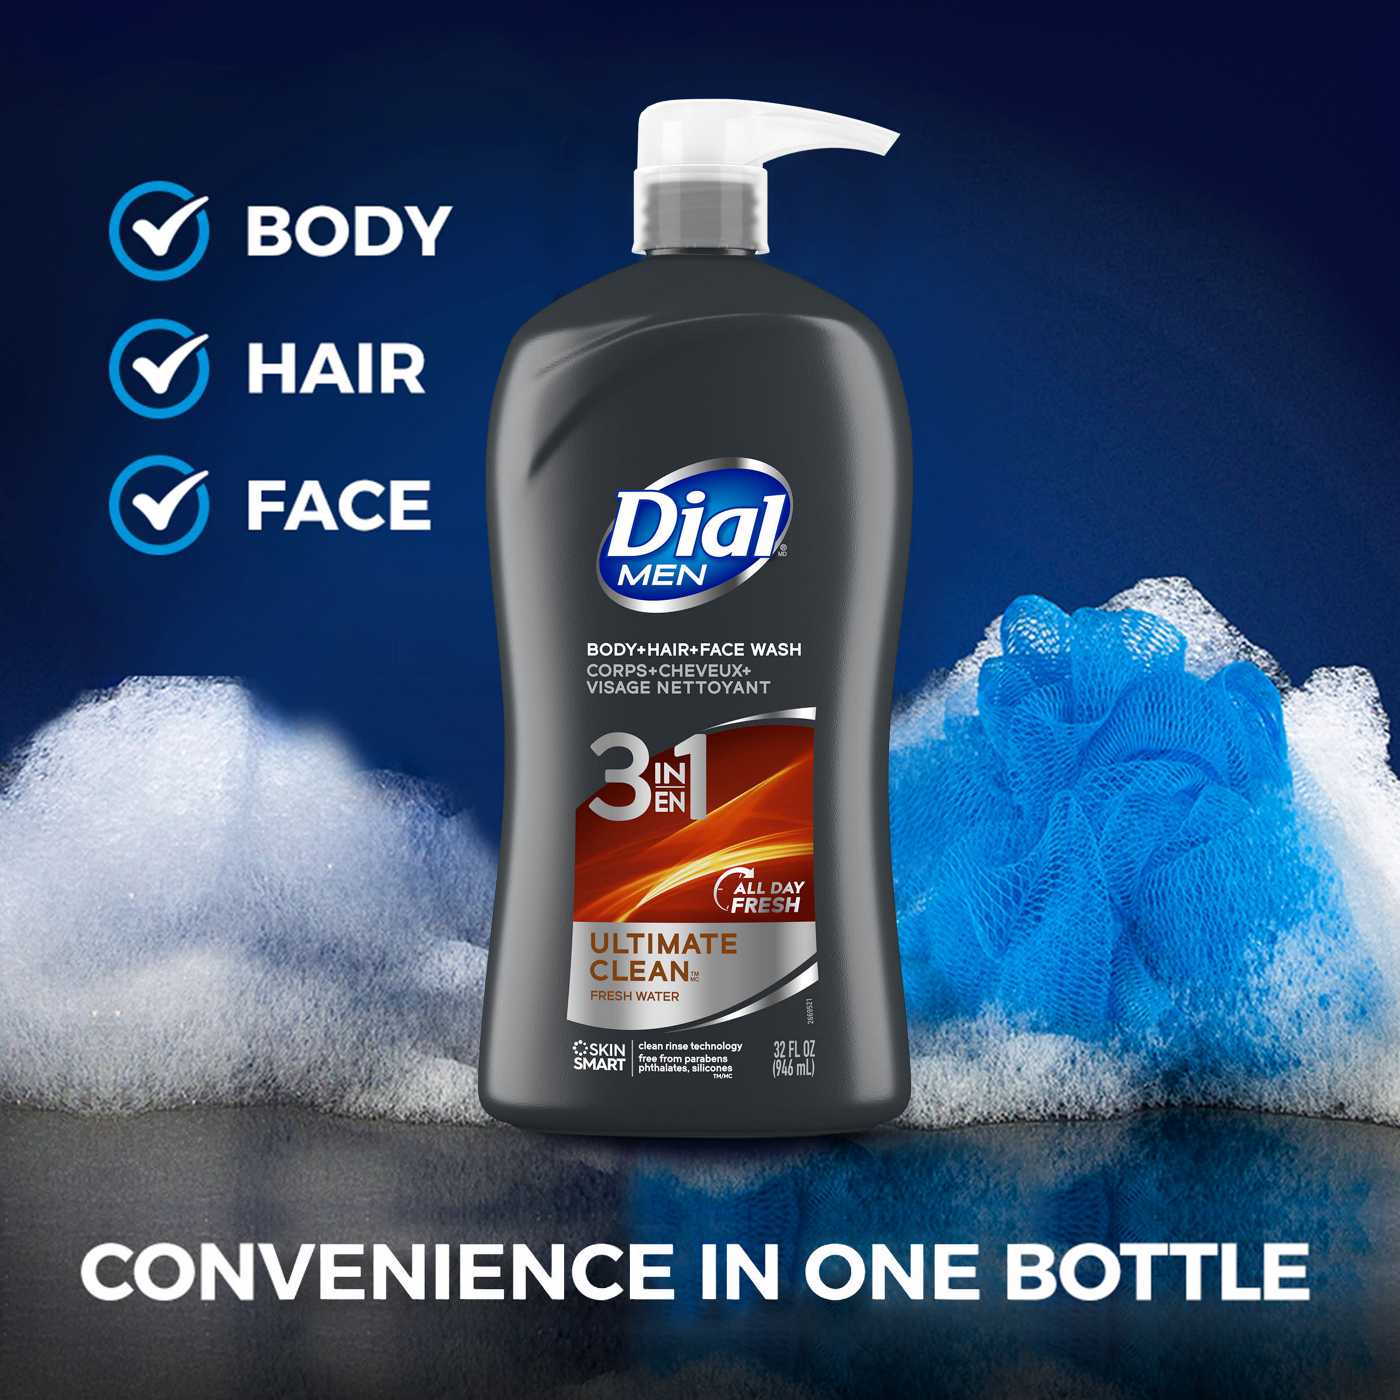 Dial Men 3in1 Body, Hair and Face Wash - Ultimate Clean; image 2 of 3